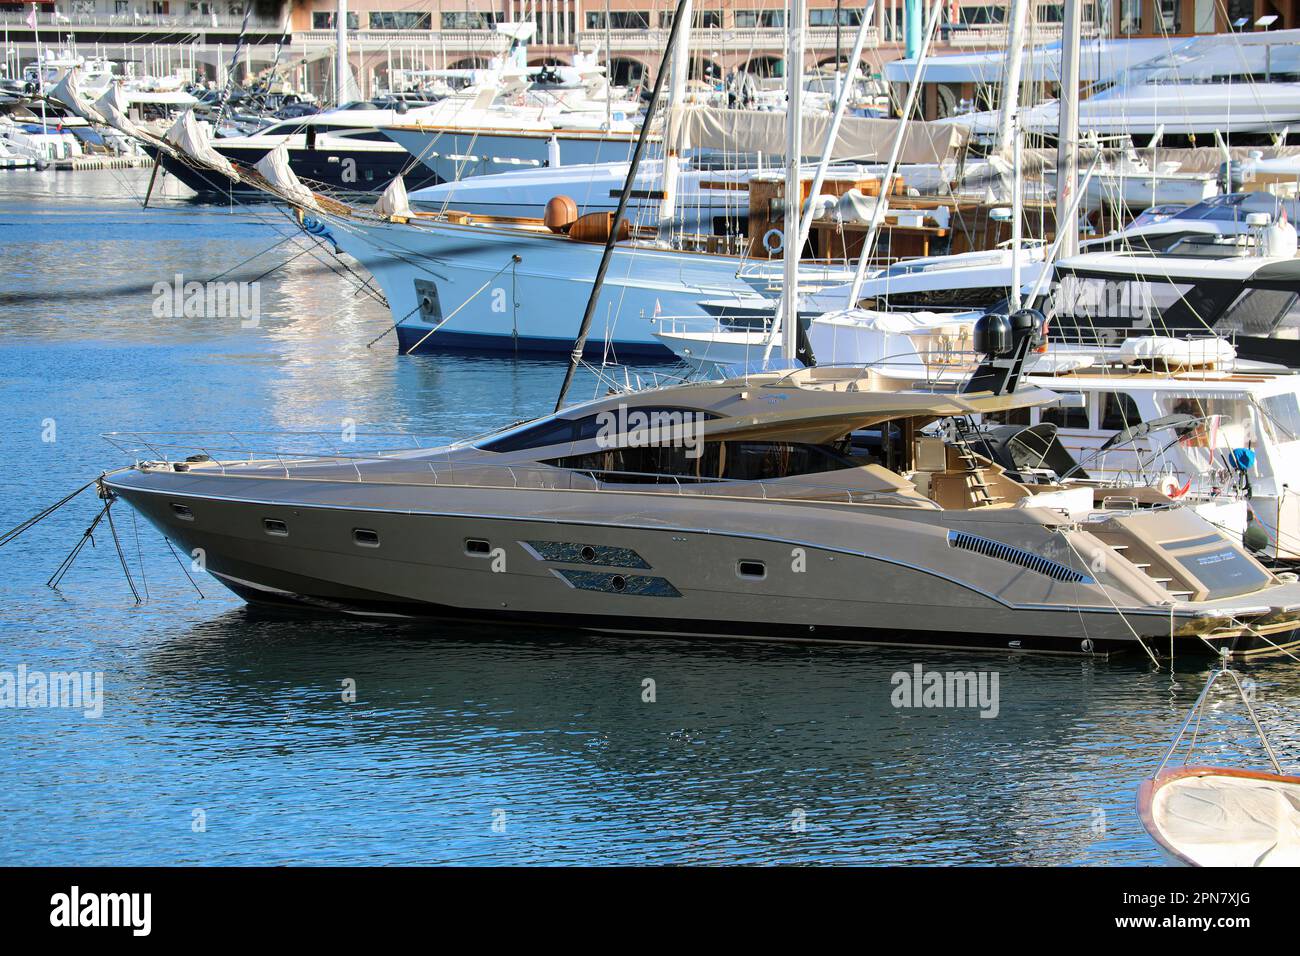 Monte-Carlo, Monaco - April 16, 2023: Golden Yacht 'Golden Fight' in the foreground and numerous superyachts lined up at Port Hercule, Monte-Carlo, Mo Stock Photo